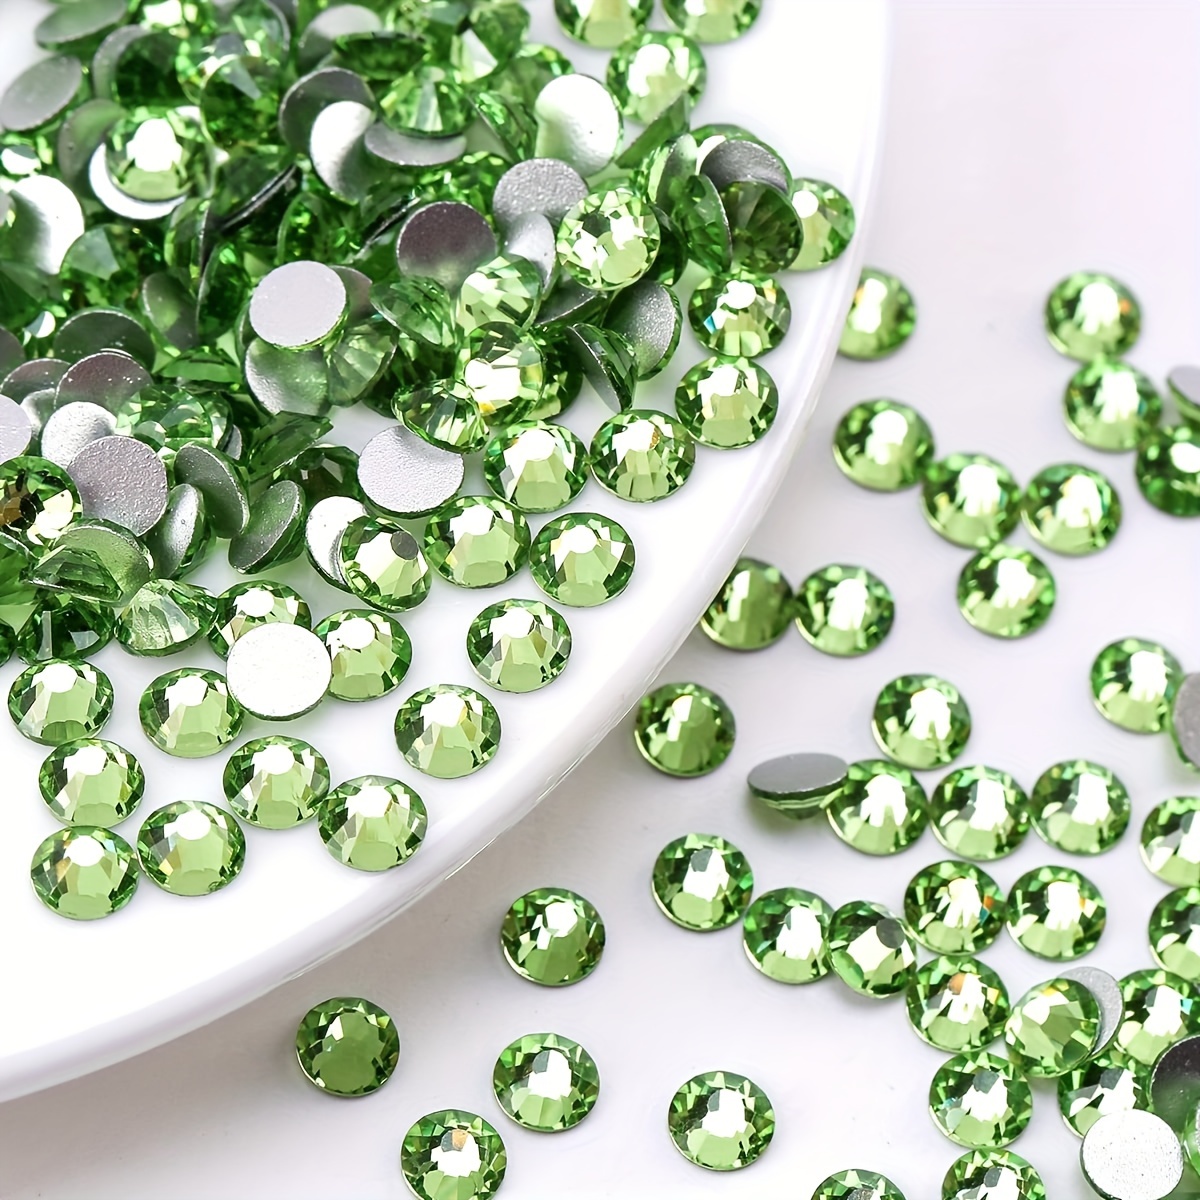 1500pcs 4/5mm Dark Green Emerald Sparkling Resin Loose Rhinestones For  Tumbler, Shoes, Clothing, Home Decor Accessories, For Jewelry Making,  Wedding D